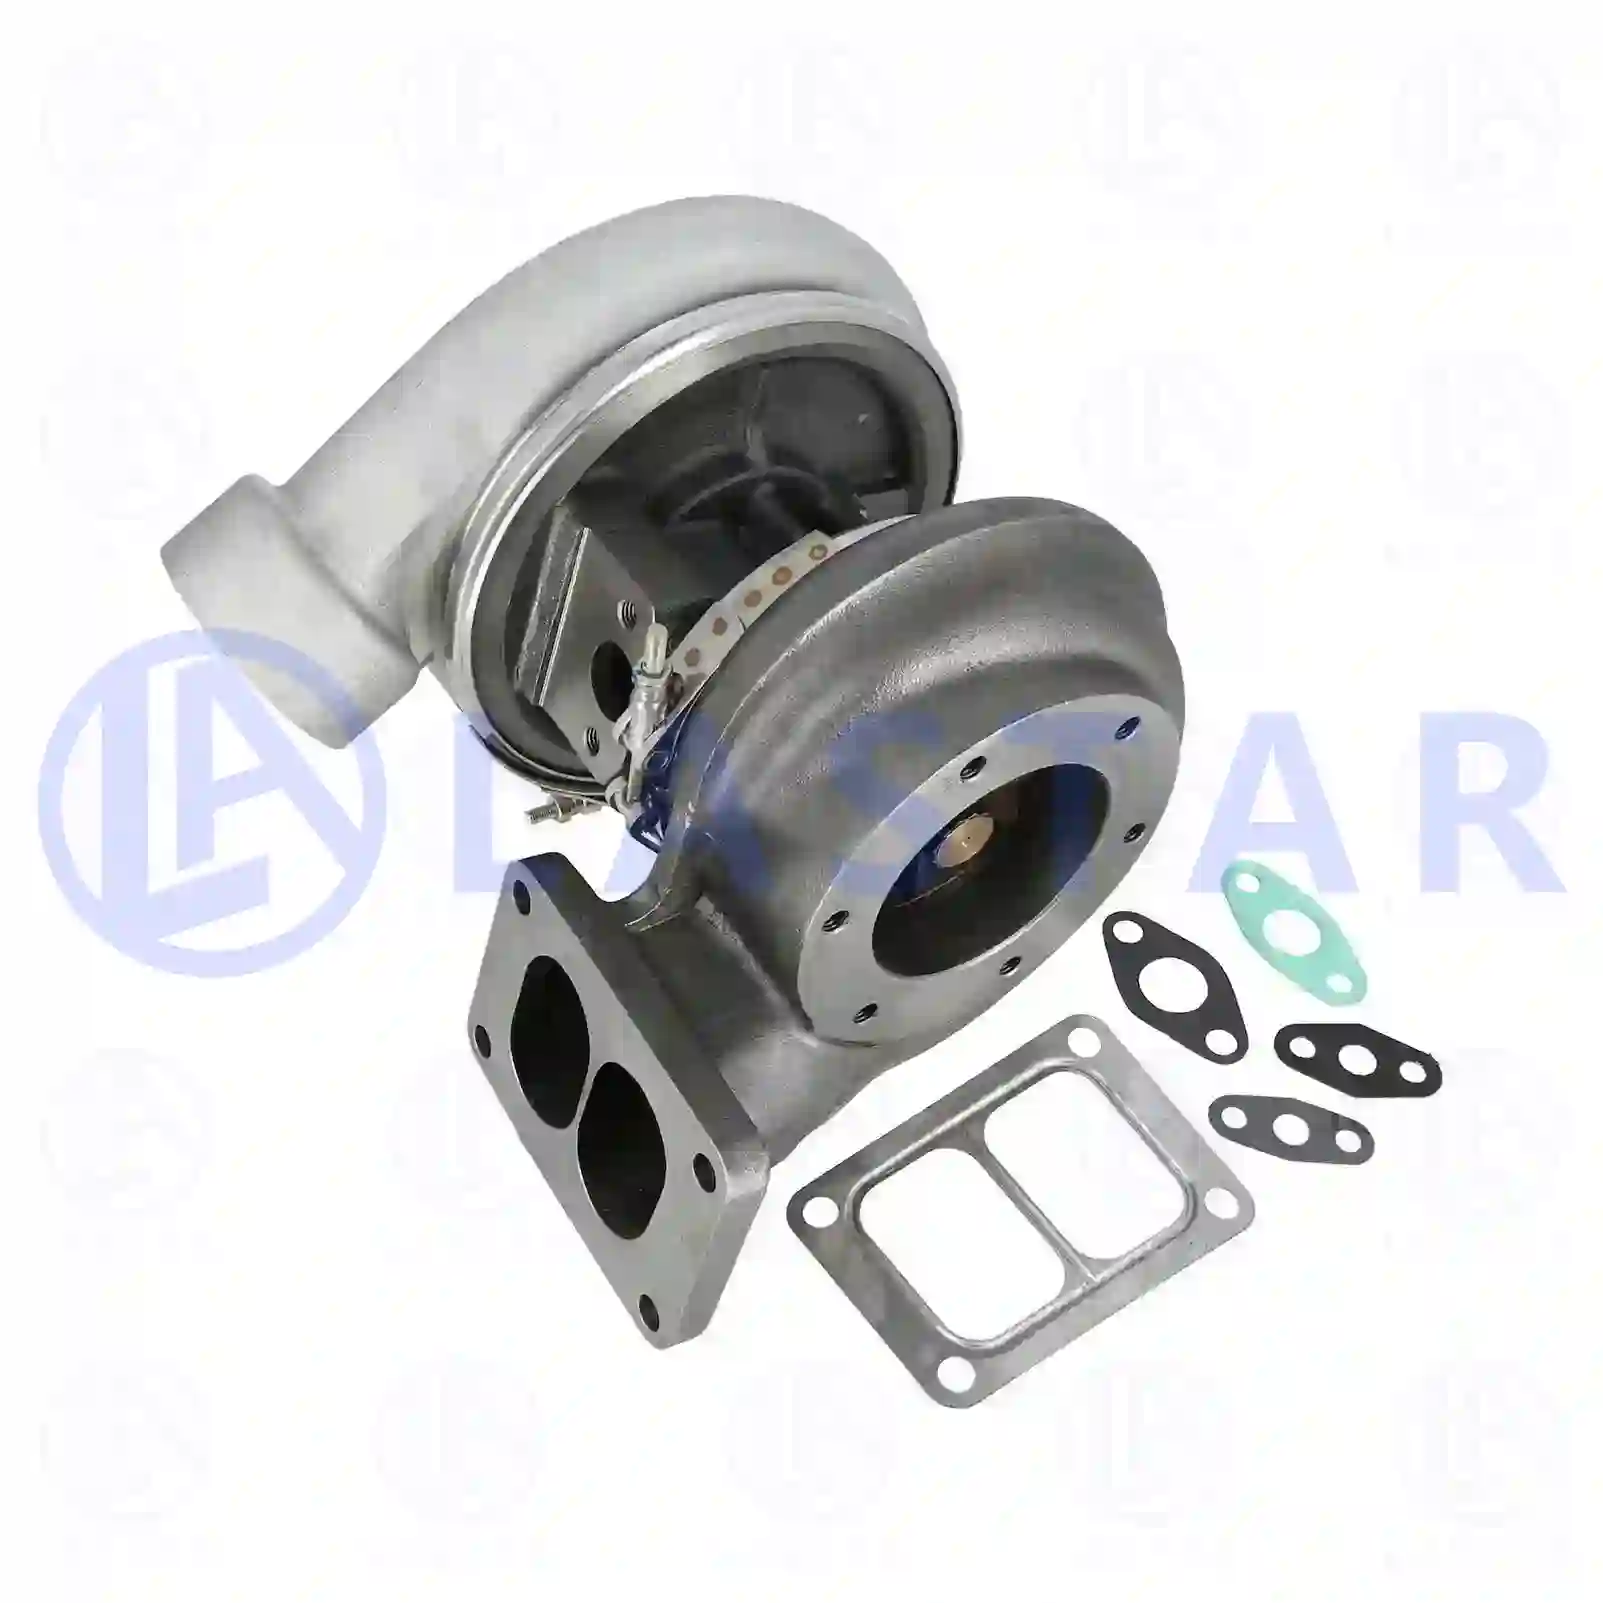 Turbocharger, with gasket kit, 77700372, 0010961399, 0010968399, 001096839980, 0010969899, 0020961099, 0020961499, 0020961599, 0030965999 ||  77700372 Lastar Spare Part | Truck Spare Parts, Auotomotive Spare Parts Turbocharger, with gasket kit, 77700372, 0010961399, 0010968399, 001096839980, 0010969899, 0020961099, 0020961499, 0020961599, 0030965999 ||  77700372 Lastar Spare Part | Truck Spare Parts, Auotomotive Spare Parts